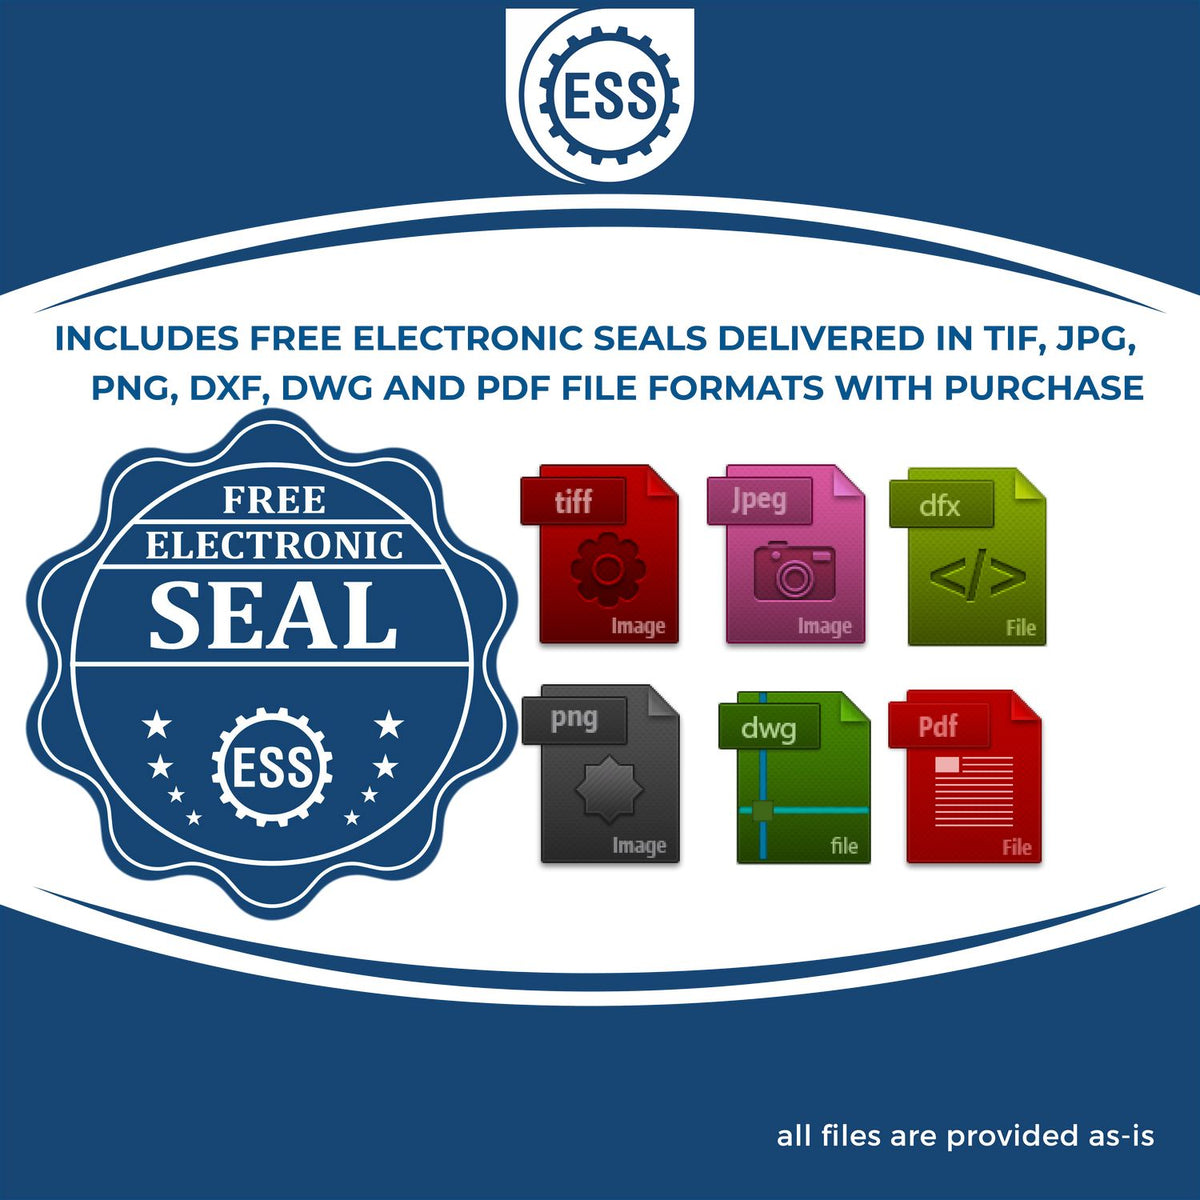 An infographic for the free electronic seal for the Slim Pre-Inked New York Professional Geologist Seal Stamp illustrating the different file type icons such as DXF, DWG, TIF, JPG and PNG.